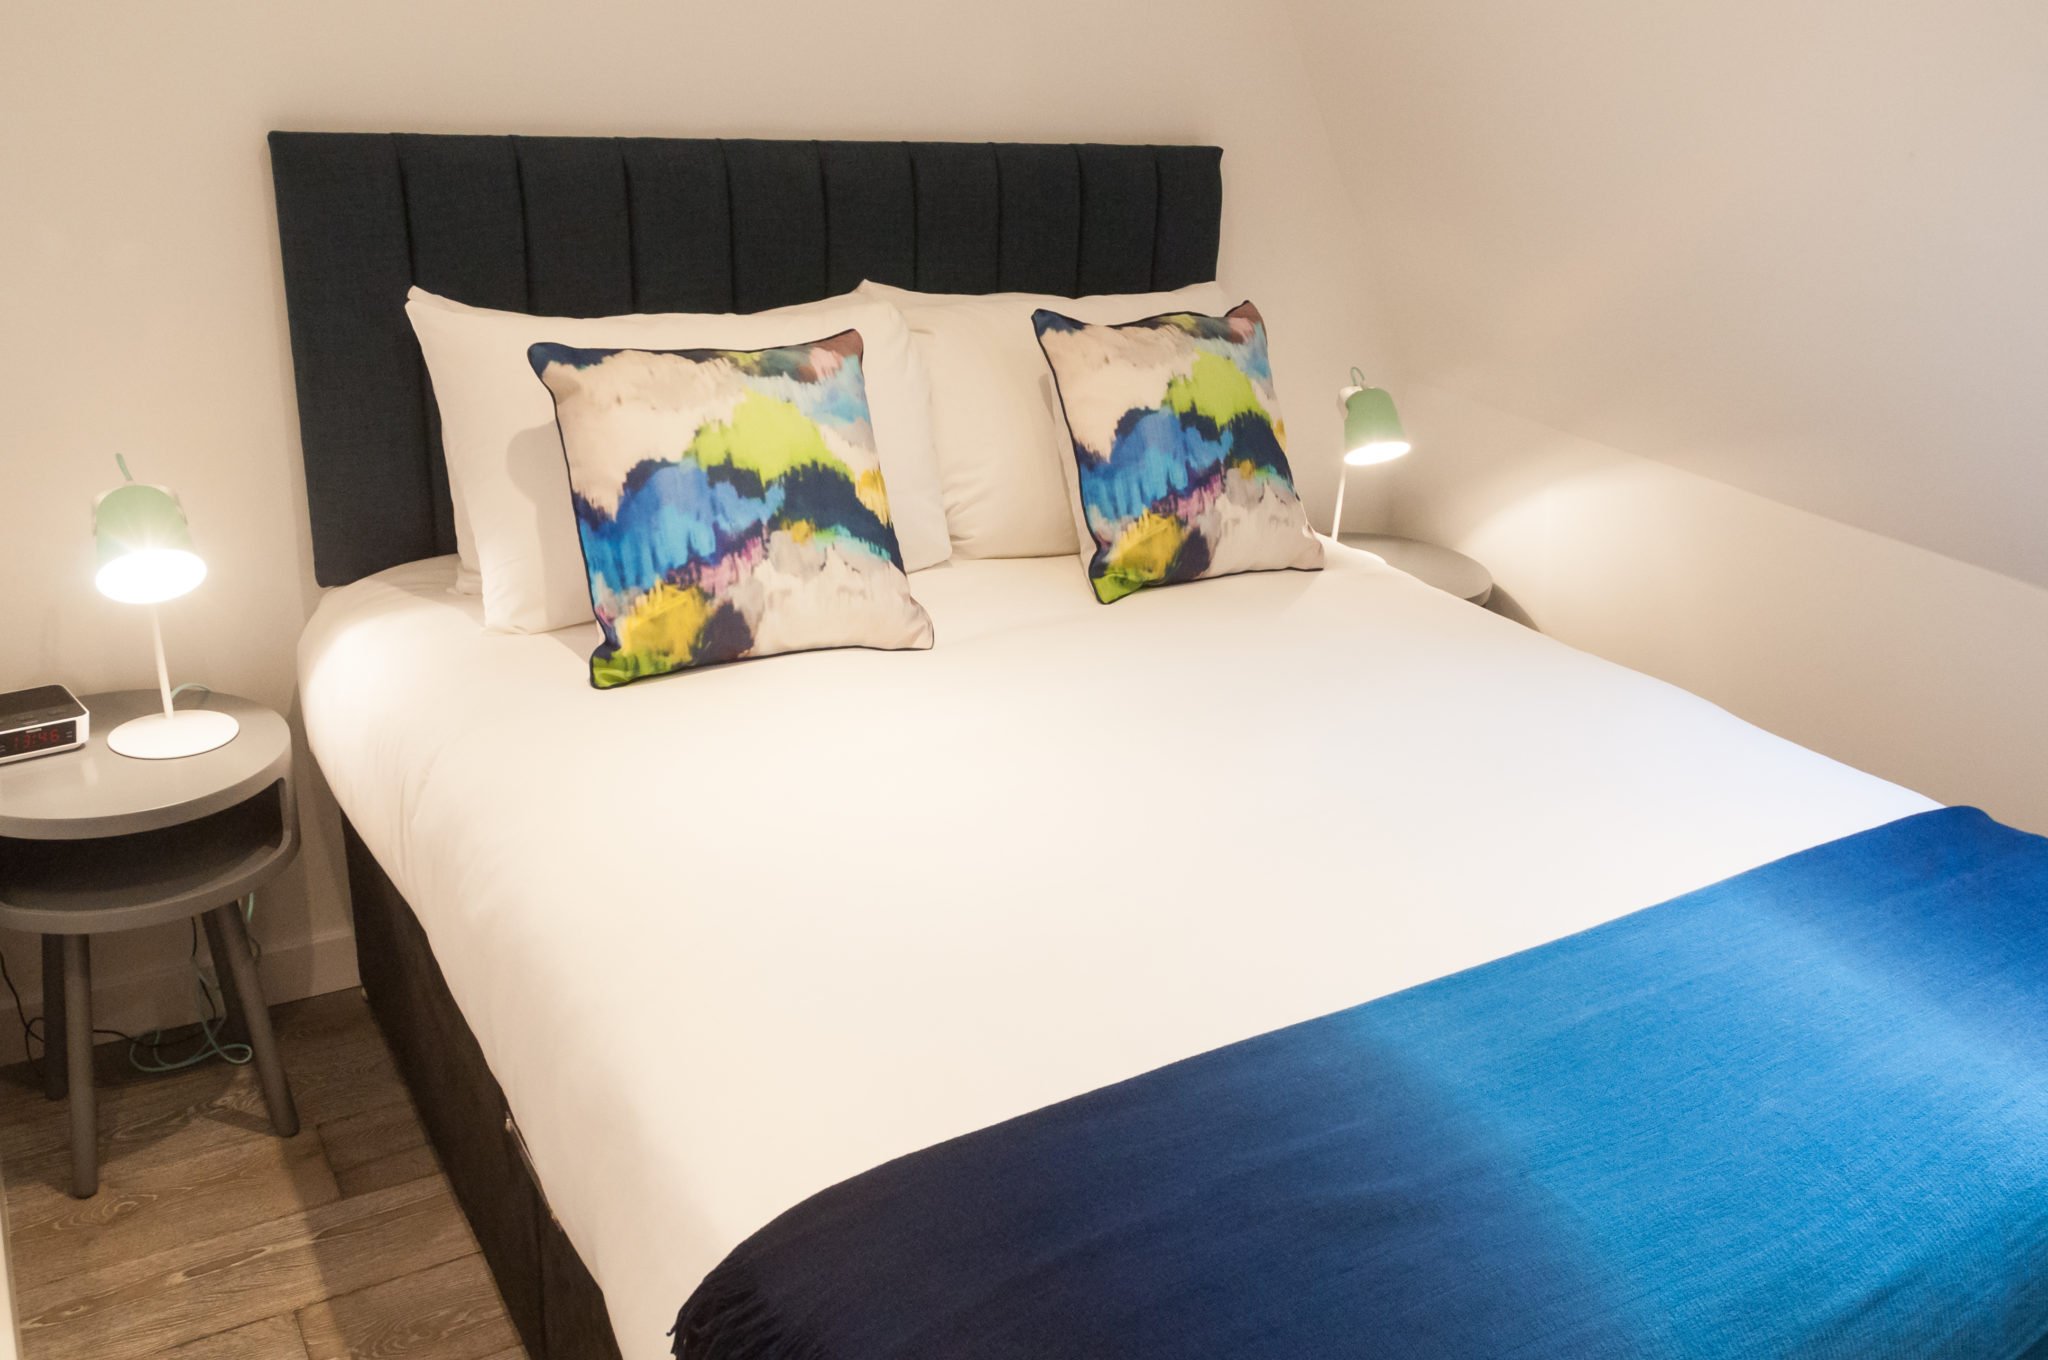 Central-London-Accommodation-Fitzrovia-| Serviced-Apartments-near-Oxford-Street,-The-West-End-&-Soho-|-Luxury-Short-Lets-London-|-BEST-RATES---BOOK-NOW!!-Urban-Stay